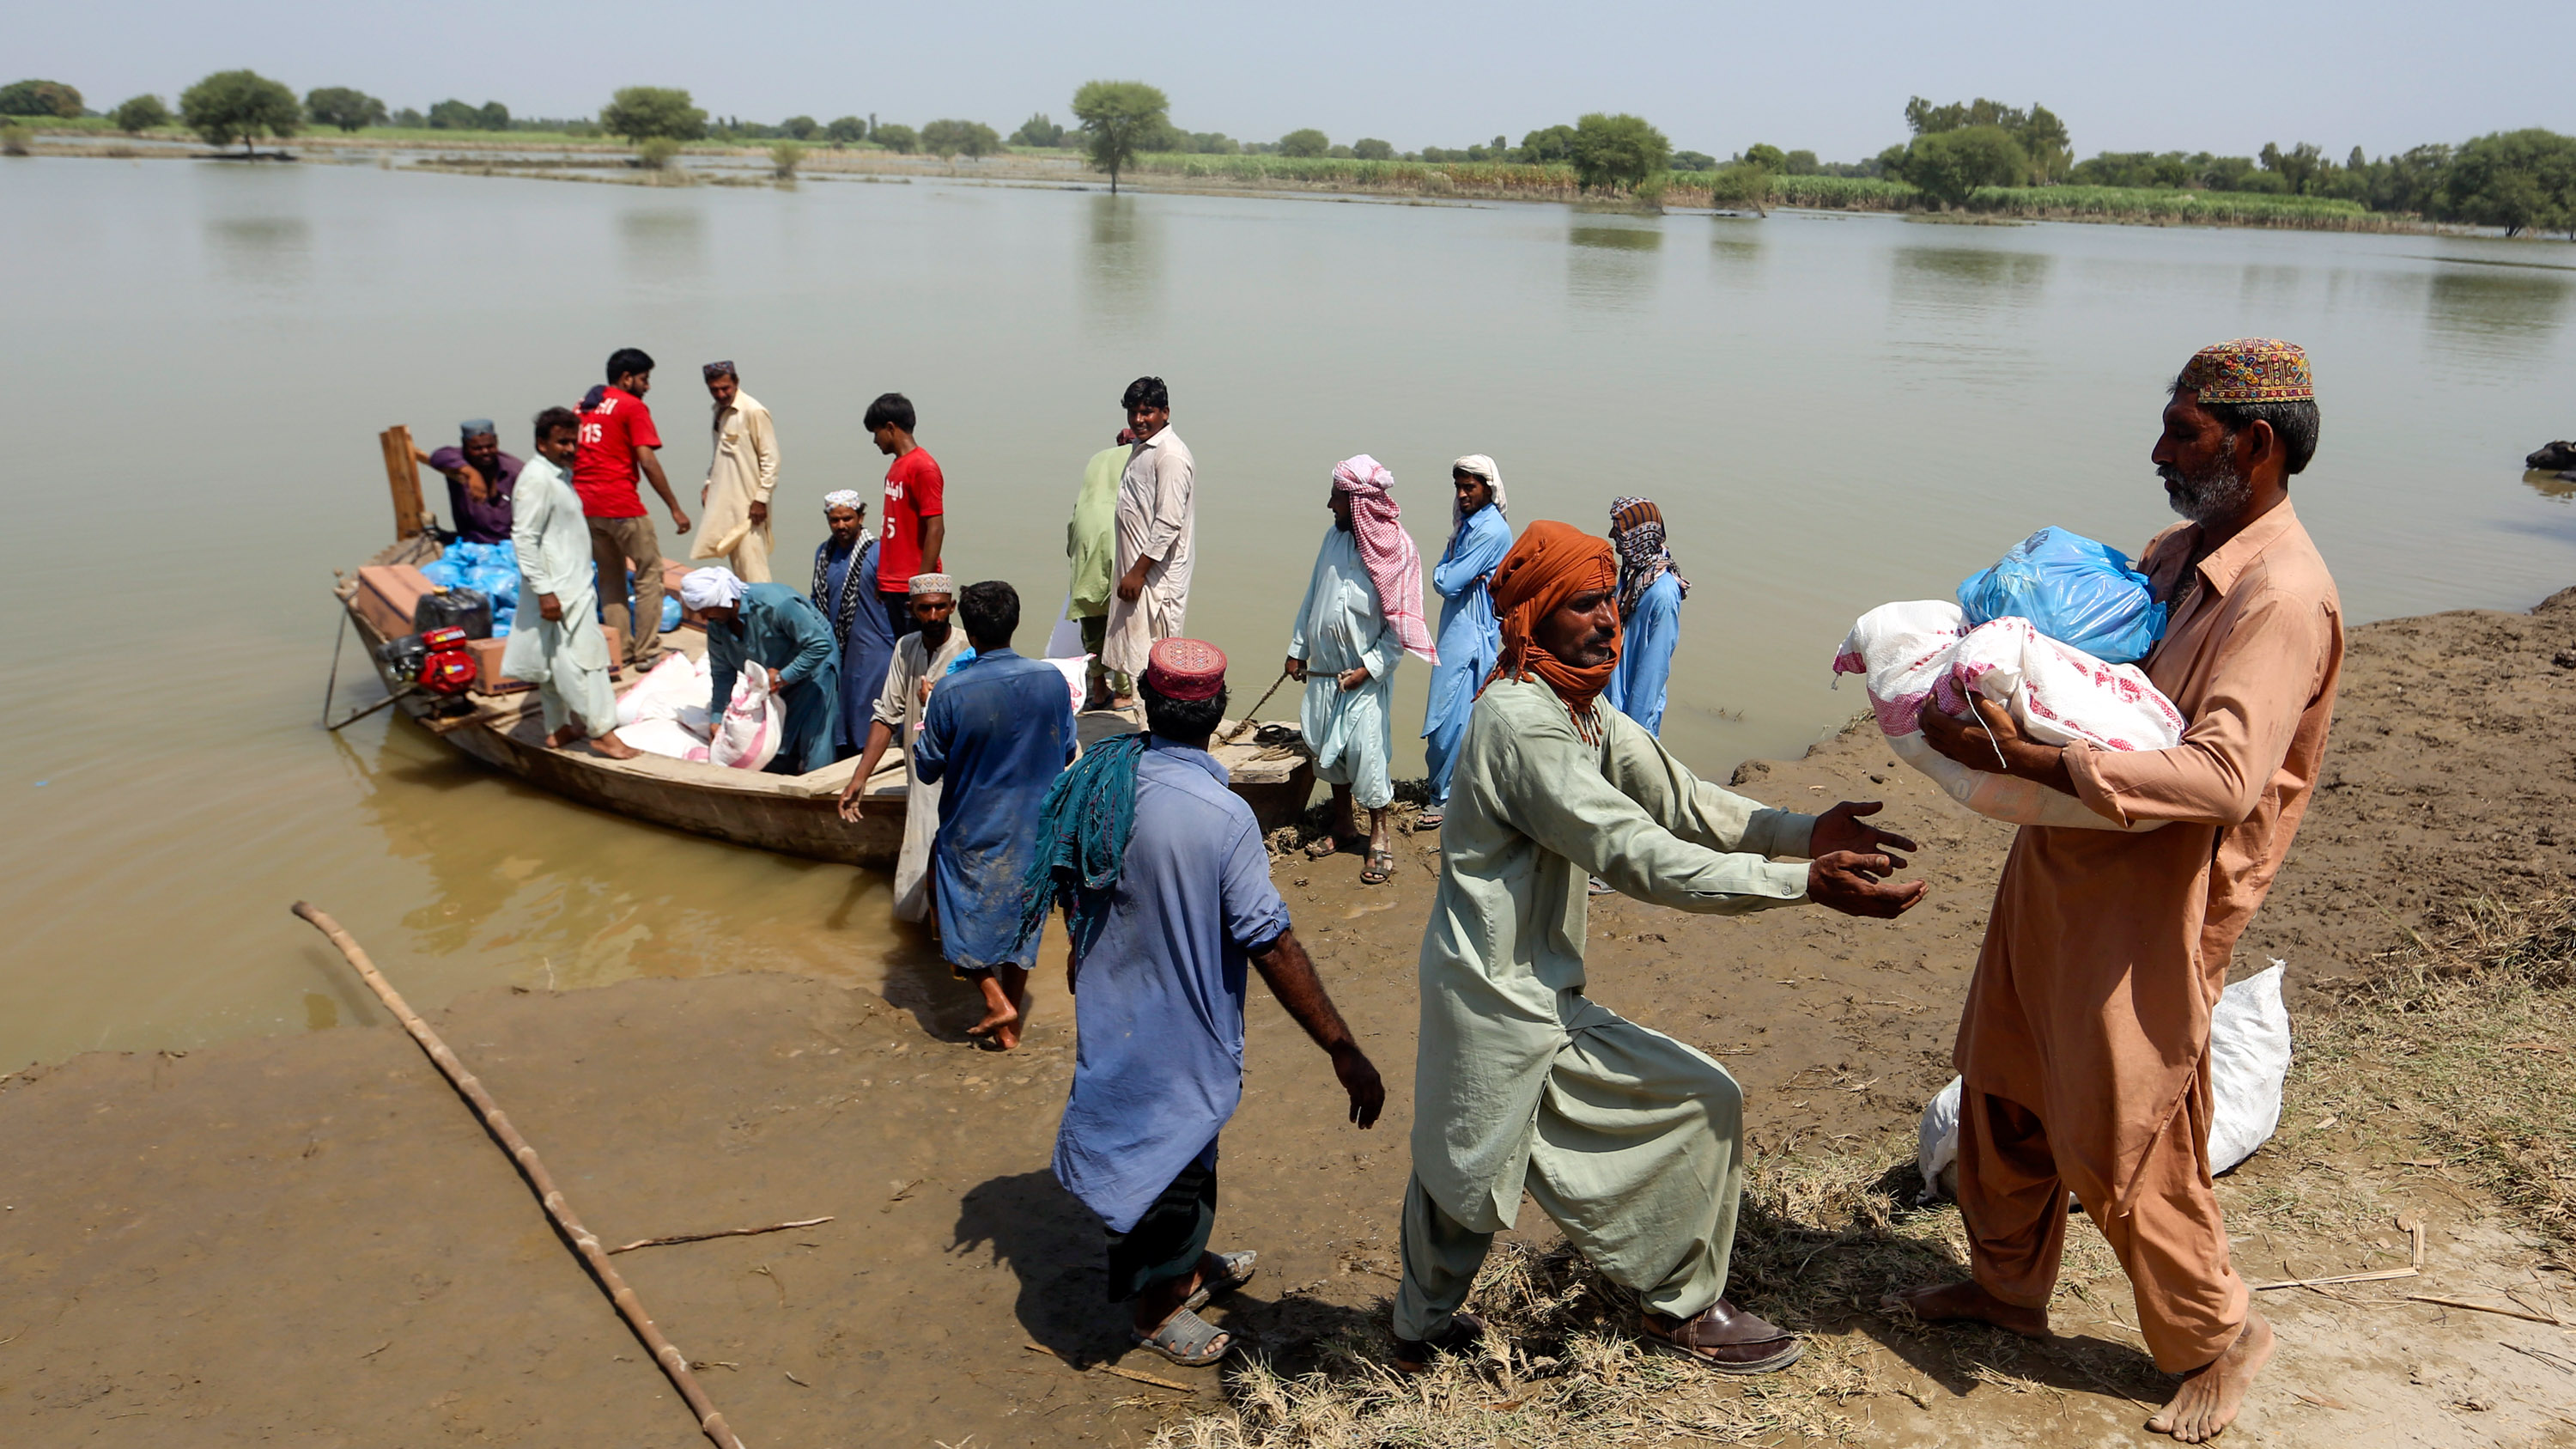 flooding victims and relief workers load aid onto a small boat in Pakistan